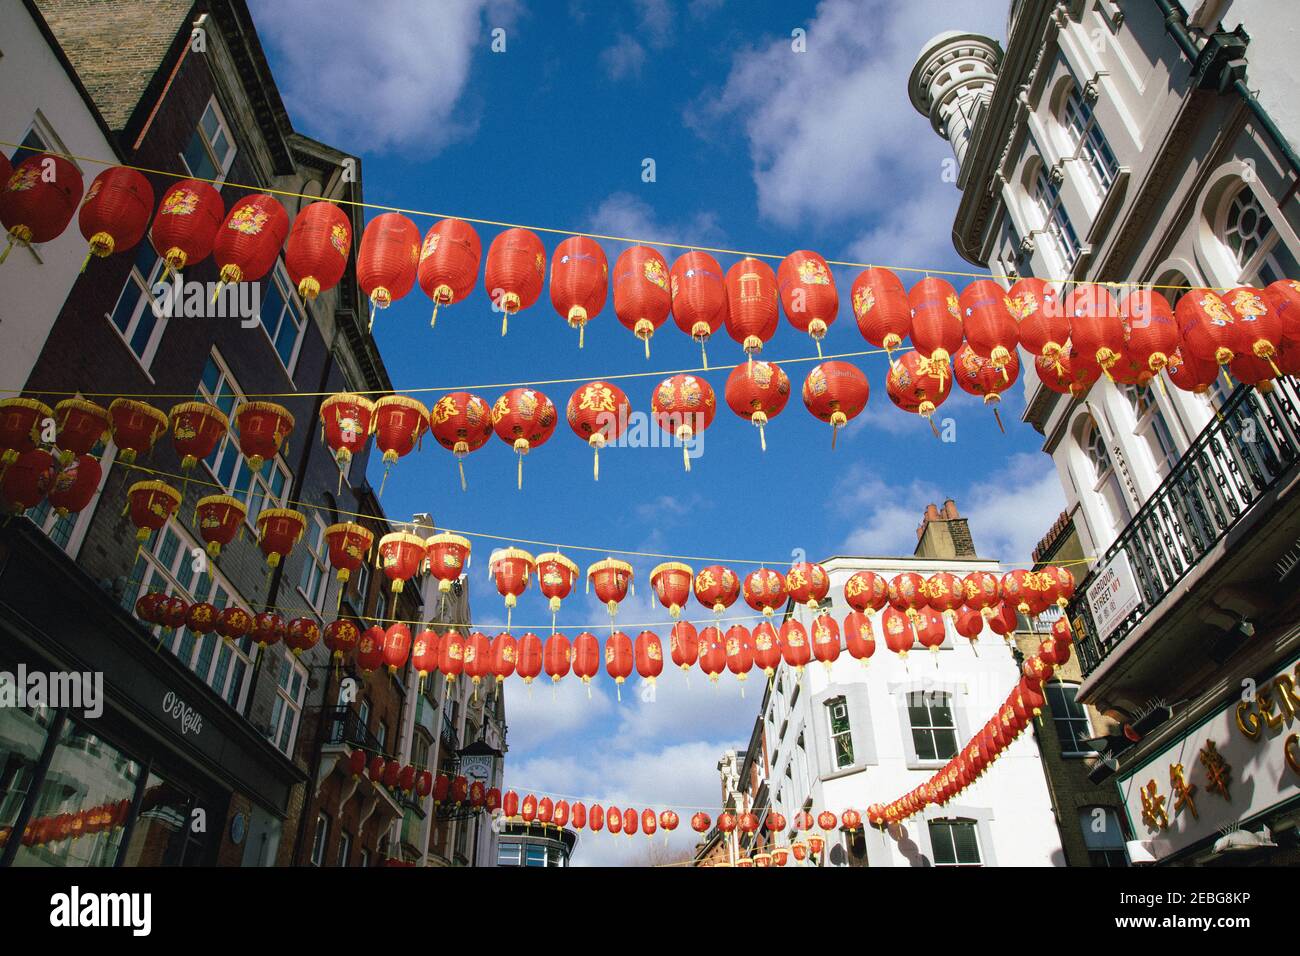 China Town, London, UK, 12th February 2021. Chinese New Year decorations. Chines New Year is a major event, although due to Covid 19 celebrations have been cancelled this year. Decorations were still put up in China Town, festooning the street. This year is the year of the Ox Stock Photo